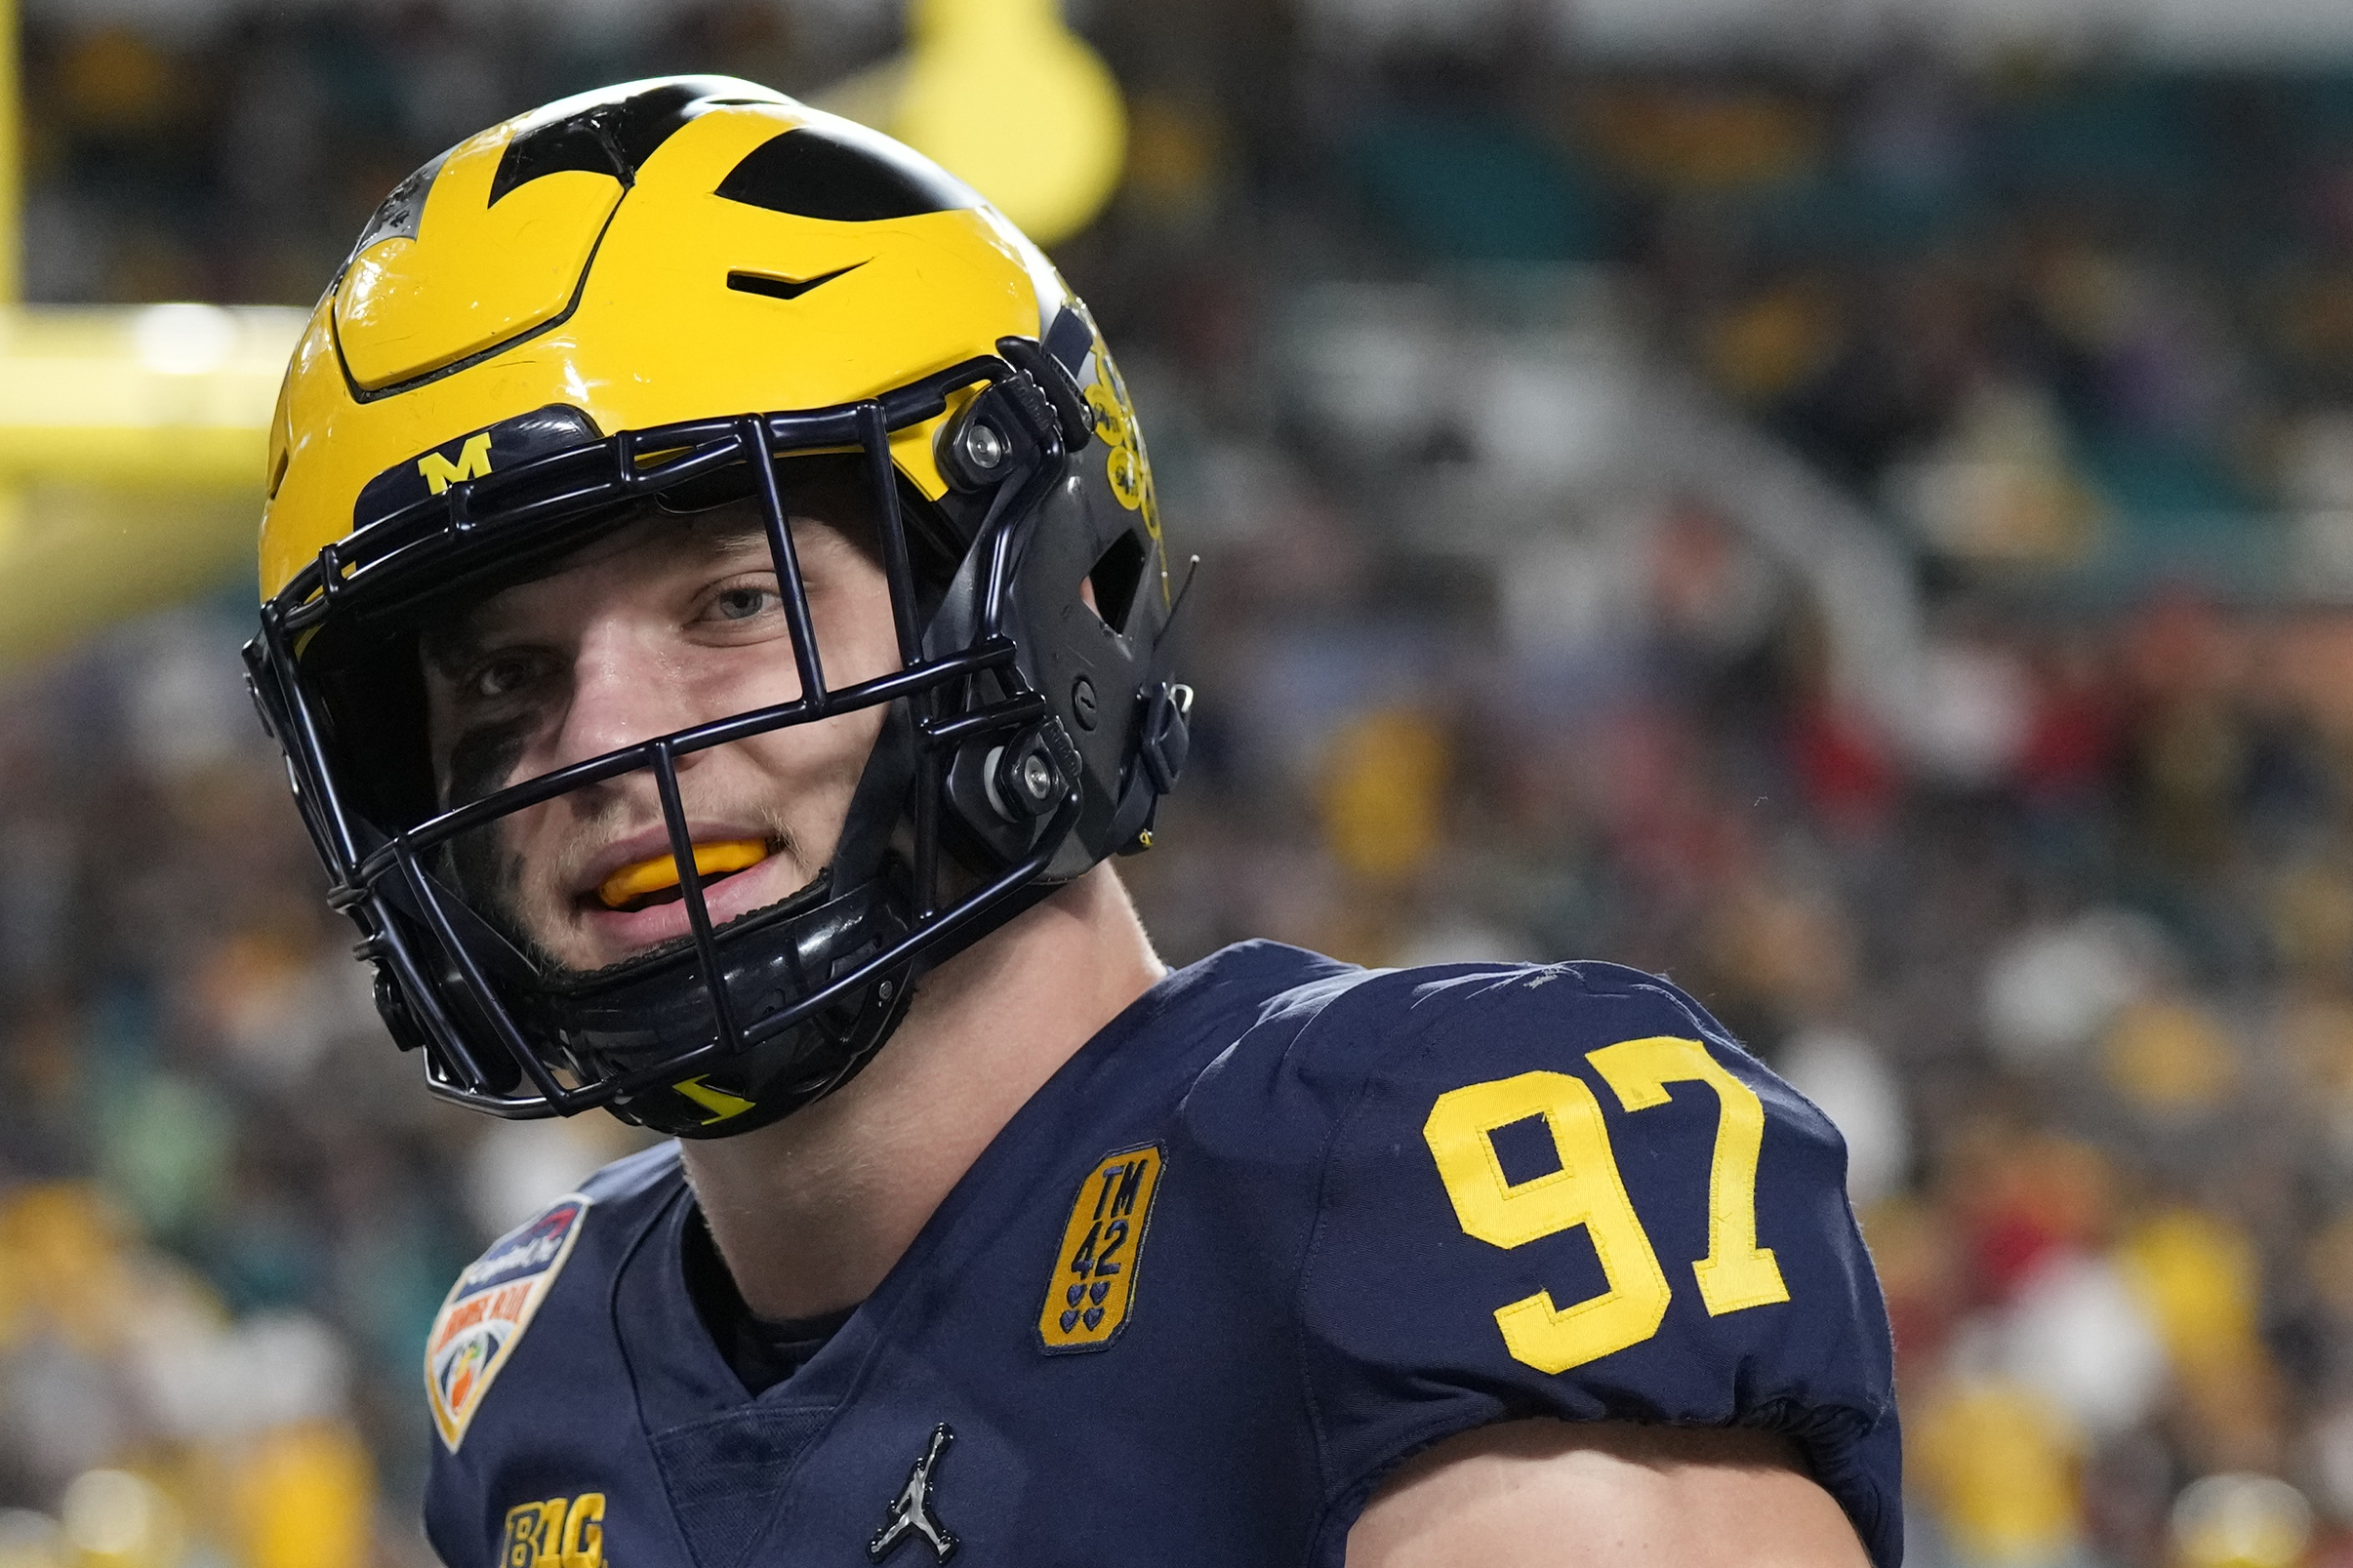 2022 NFL mock draft round-up: ESPN's Mel Kiper and others predict